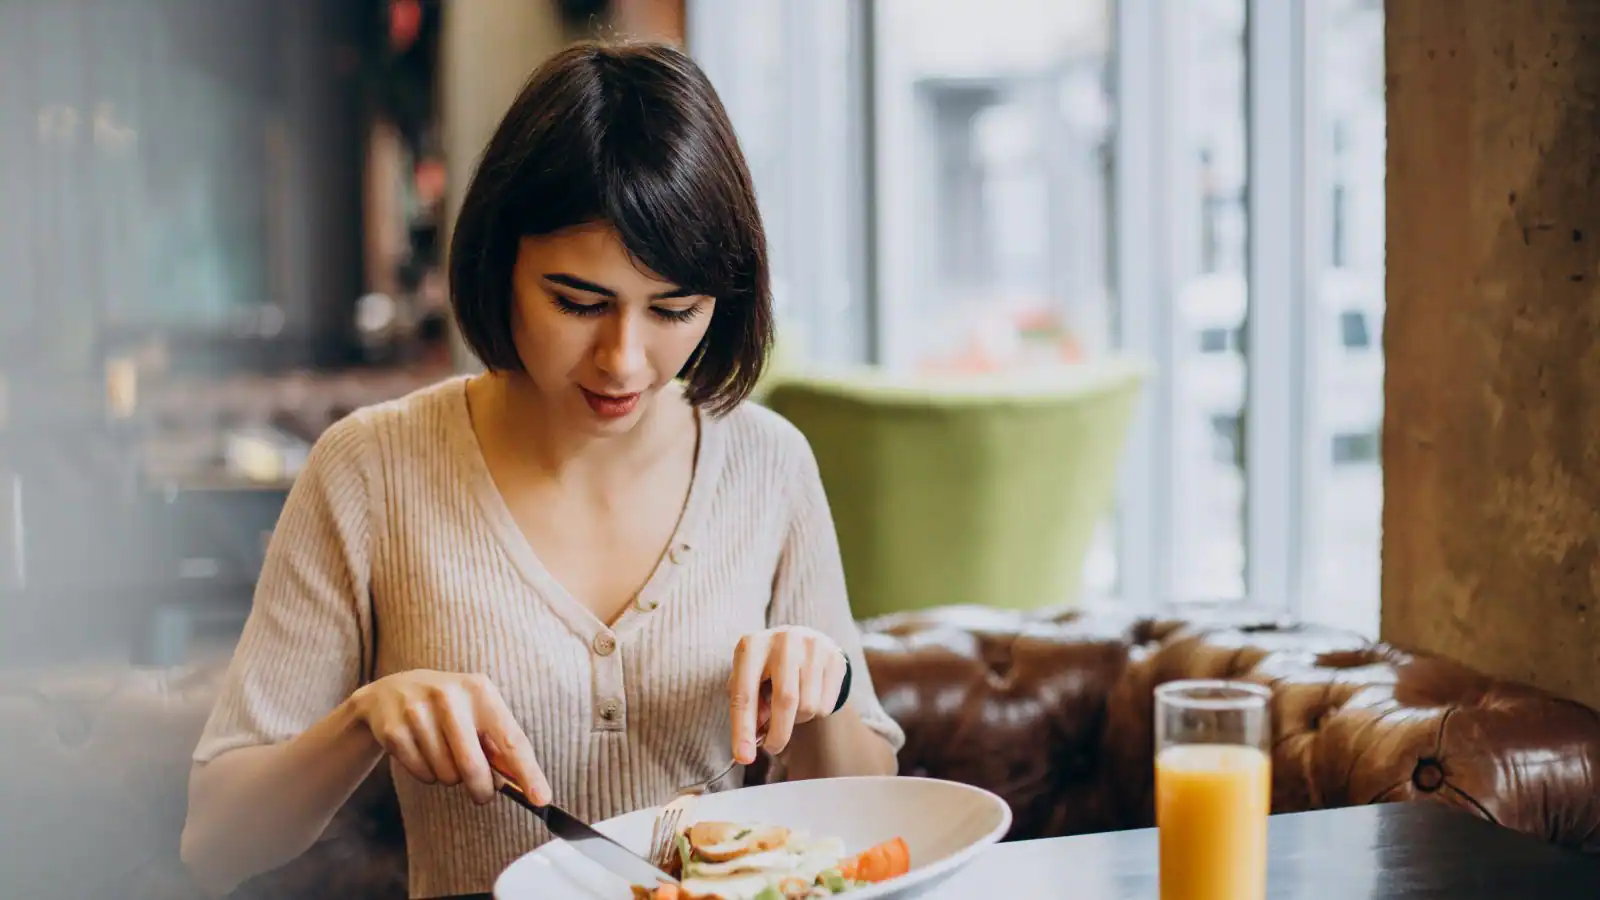 Conscious Eating: How To Practice Mindful Eating